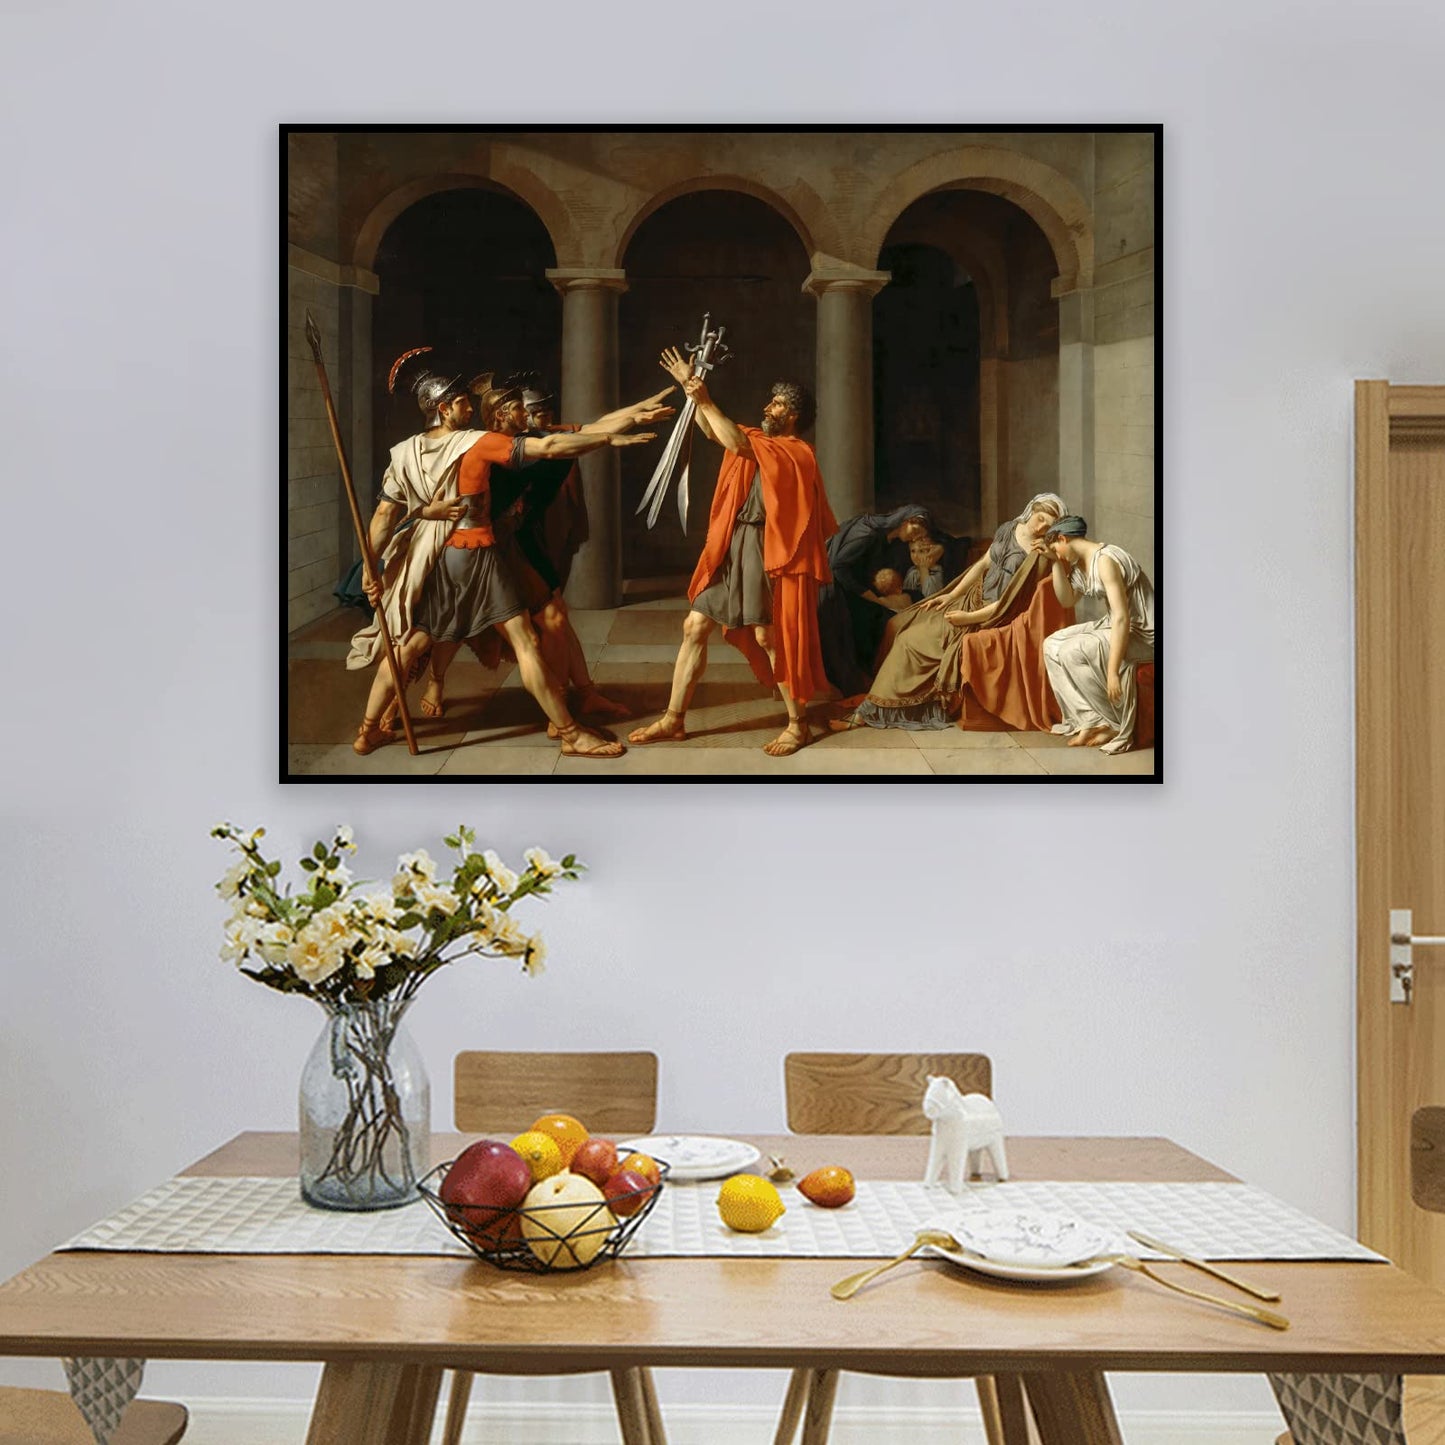 ZZPT Jacques Louis David Poster Prints - Oath of the Horatii Painting - Cool Canvas Wall Art - Renaissance Poster Modern Wall Decor for Living Room Bedingroom Unframed (12x16in/30x40cm)